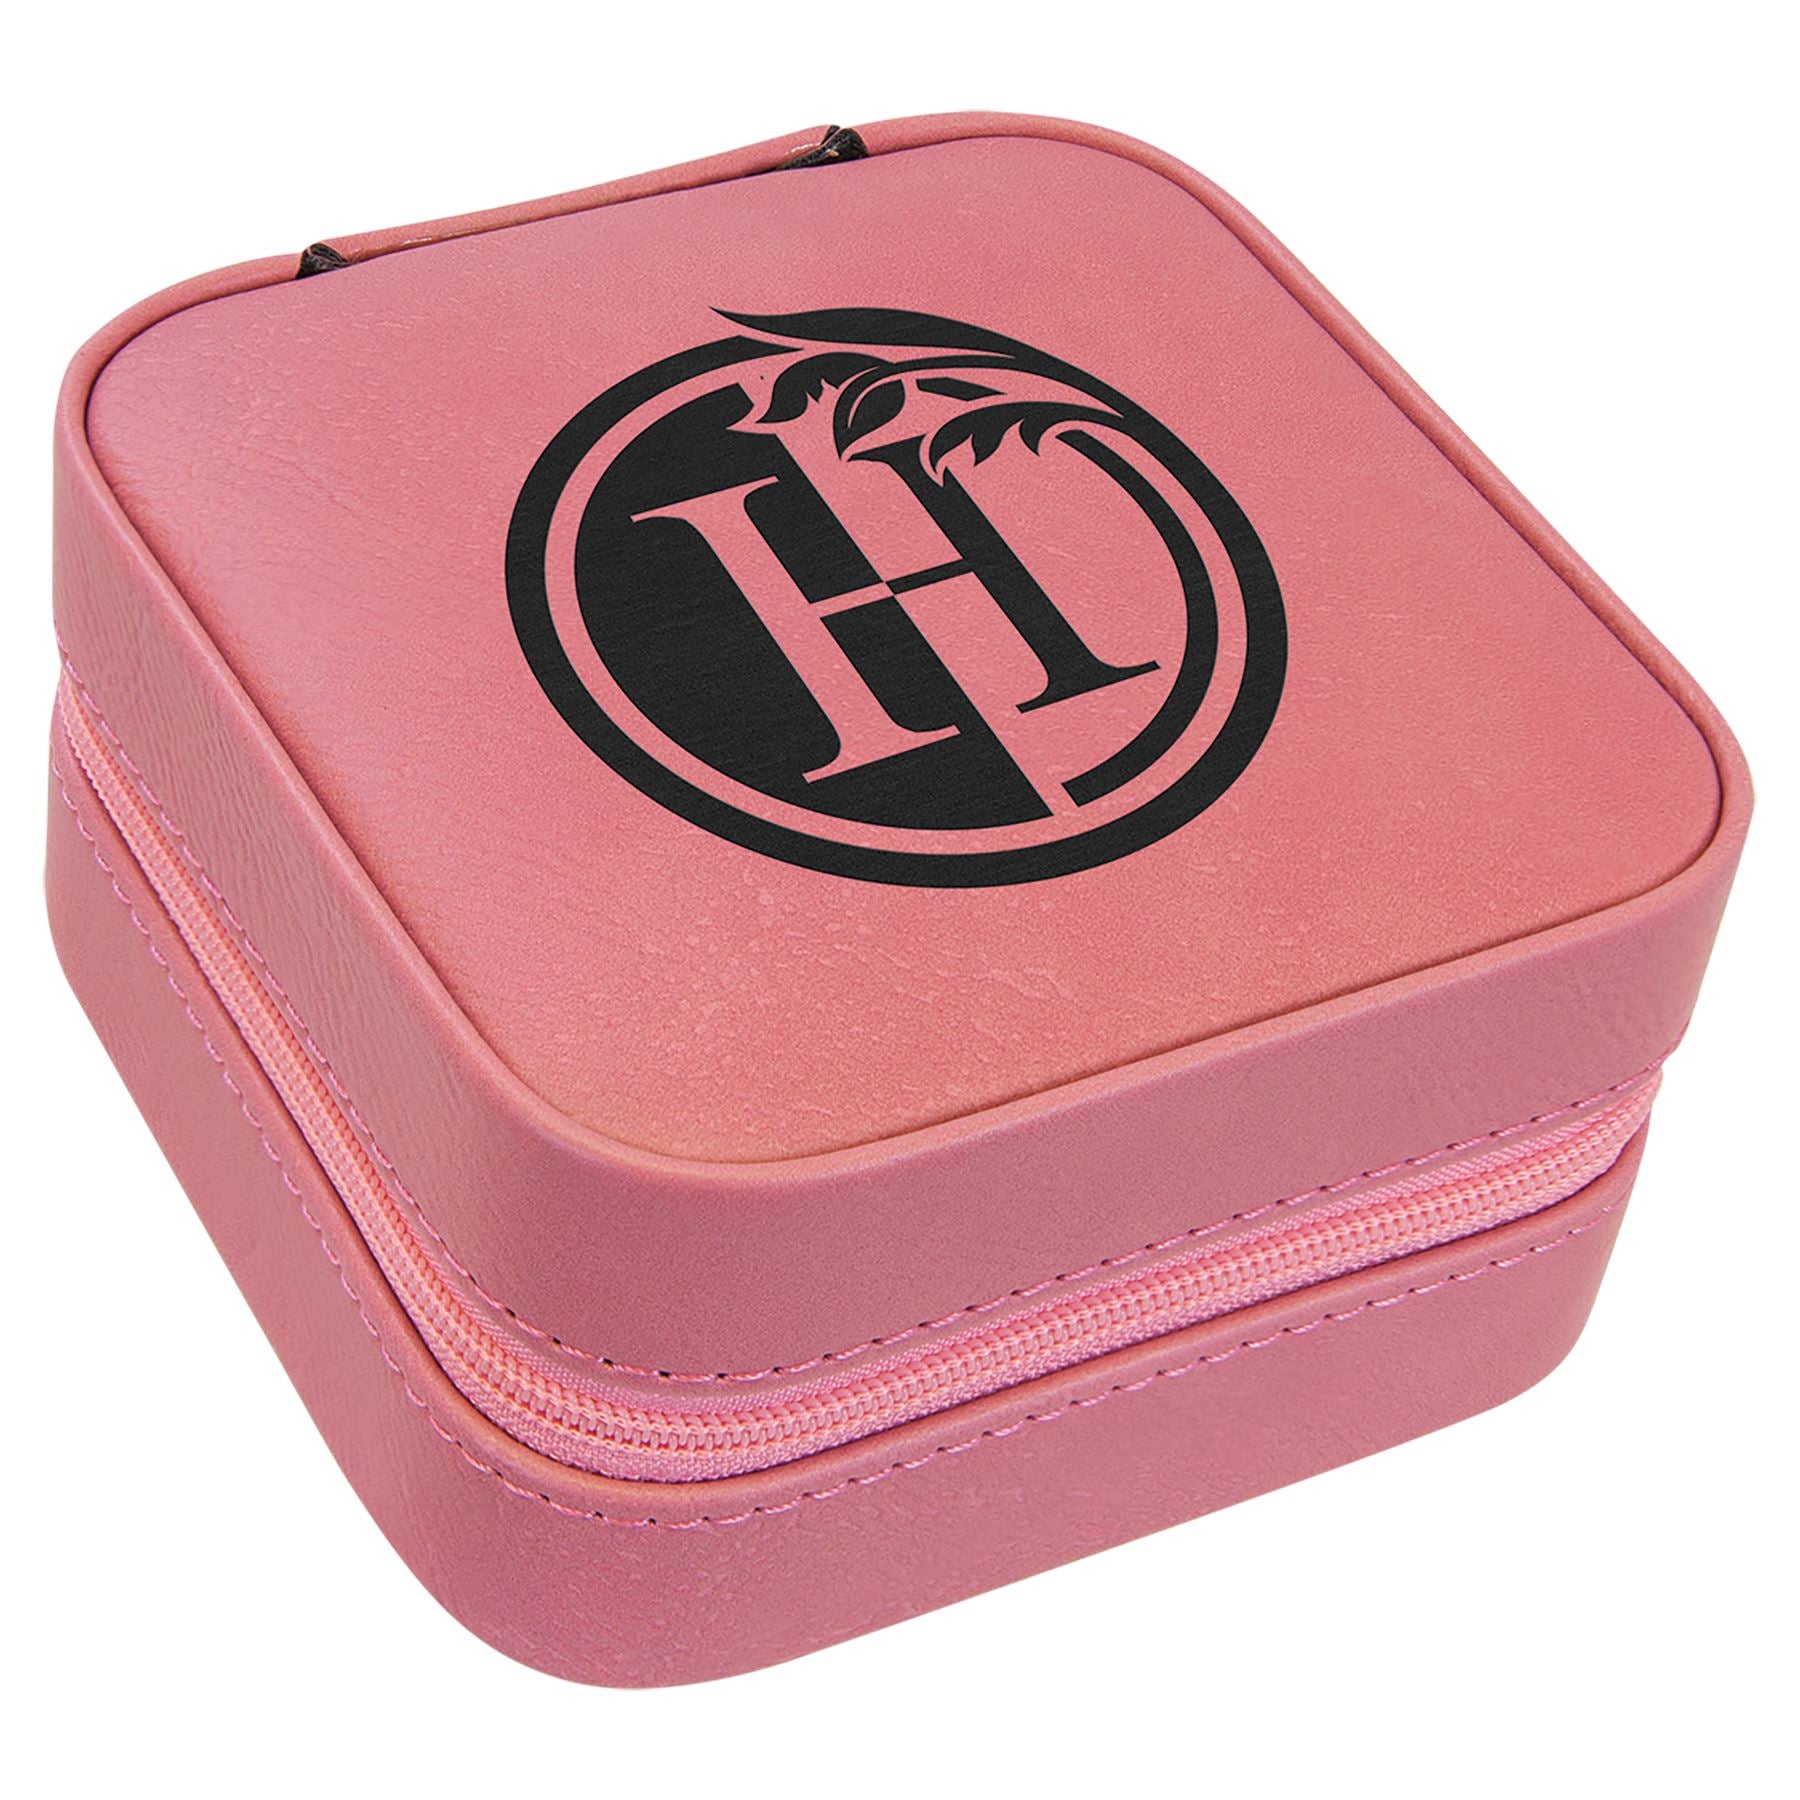 Travel Jewelry Box, Laserable Leatherette, Laser Engraved Jewelry Box Craftworks NW Pink/Black 